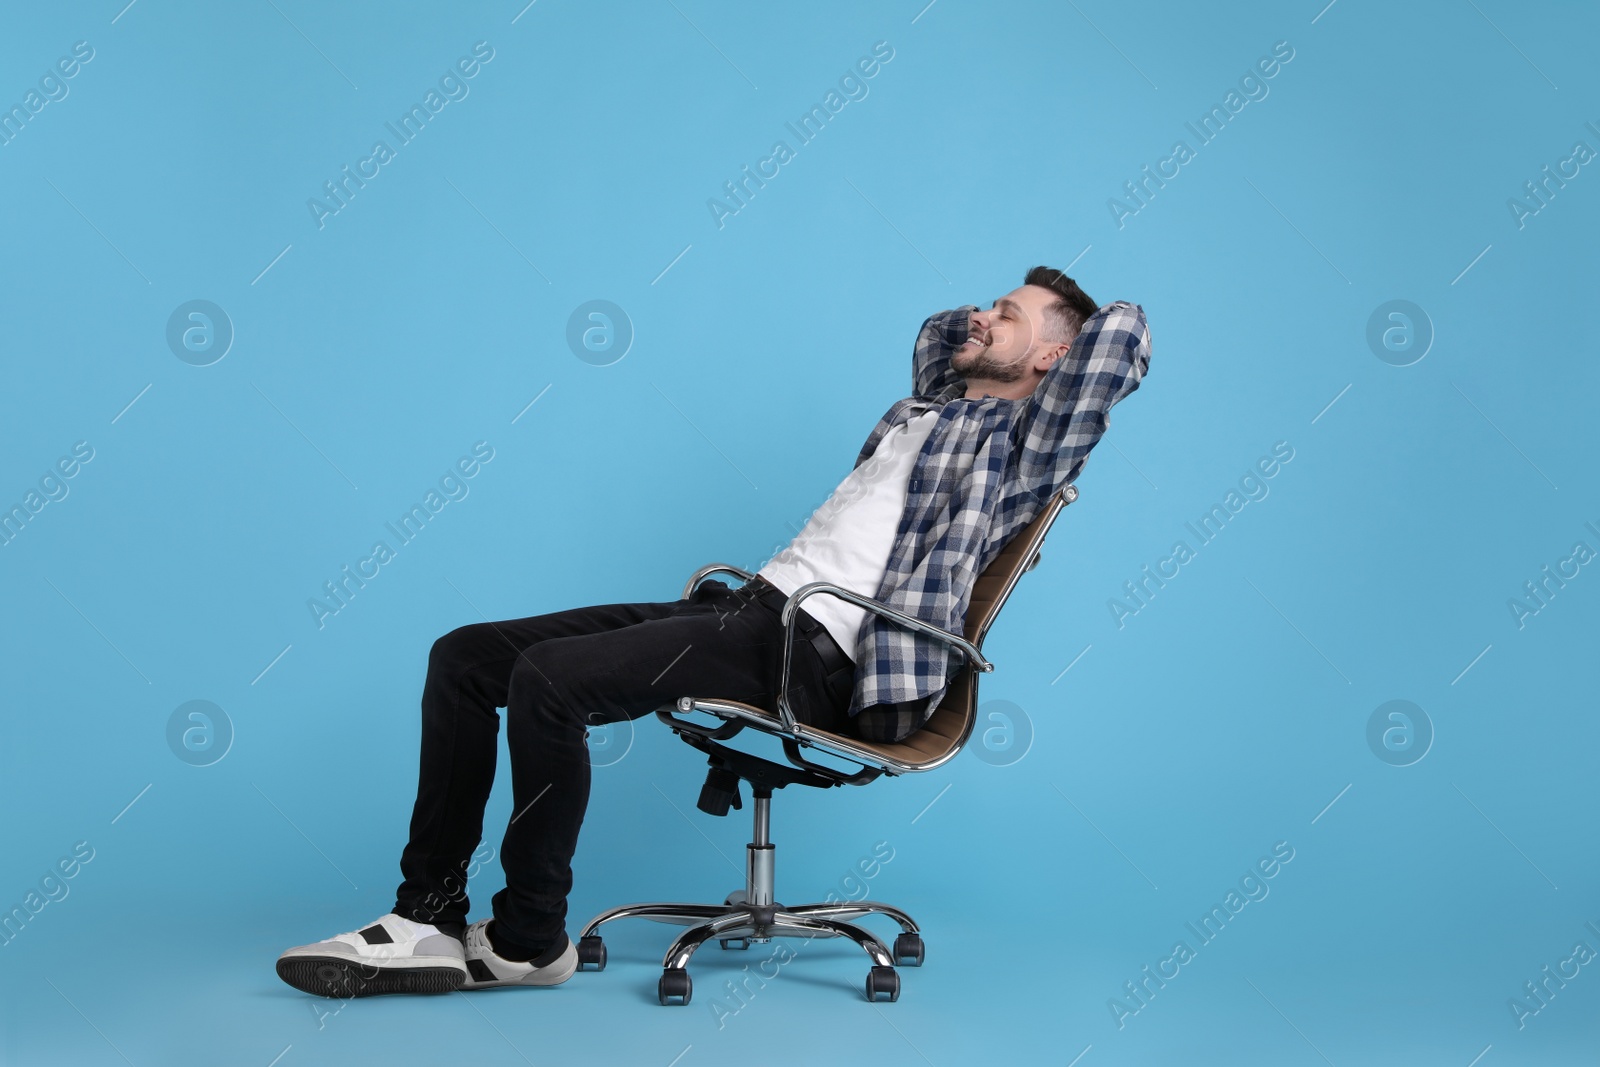 Photo of Handsome man relaxing in office chair on light blue background